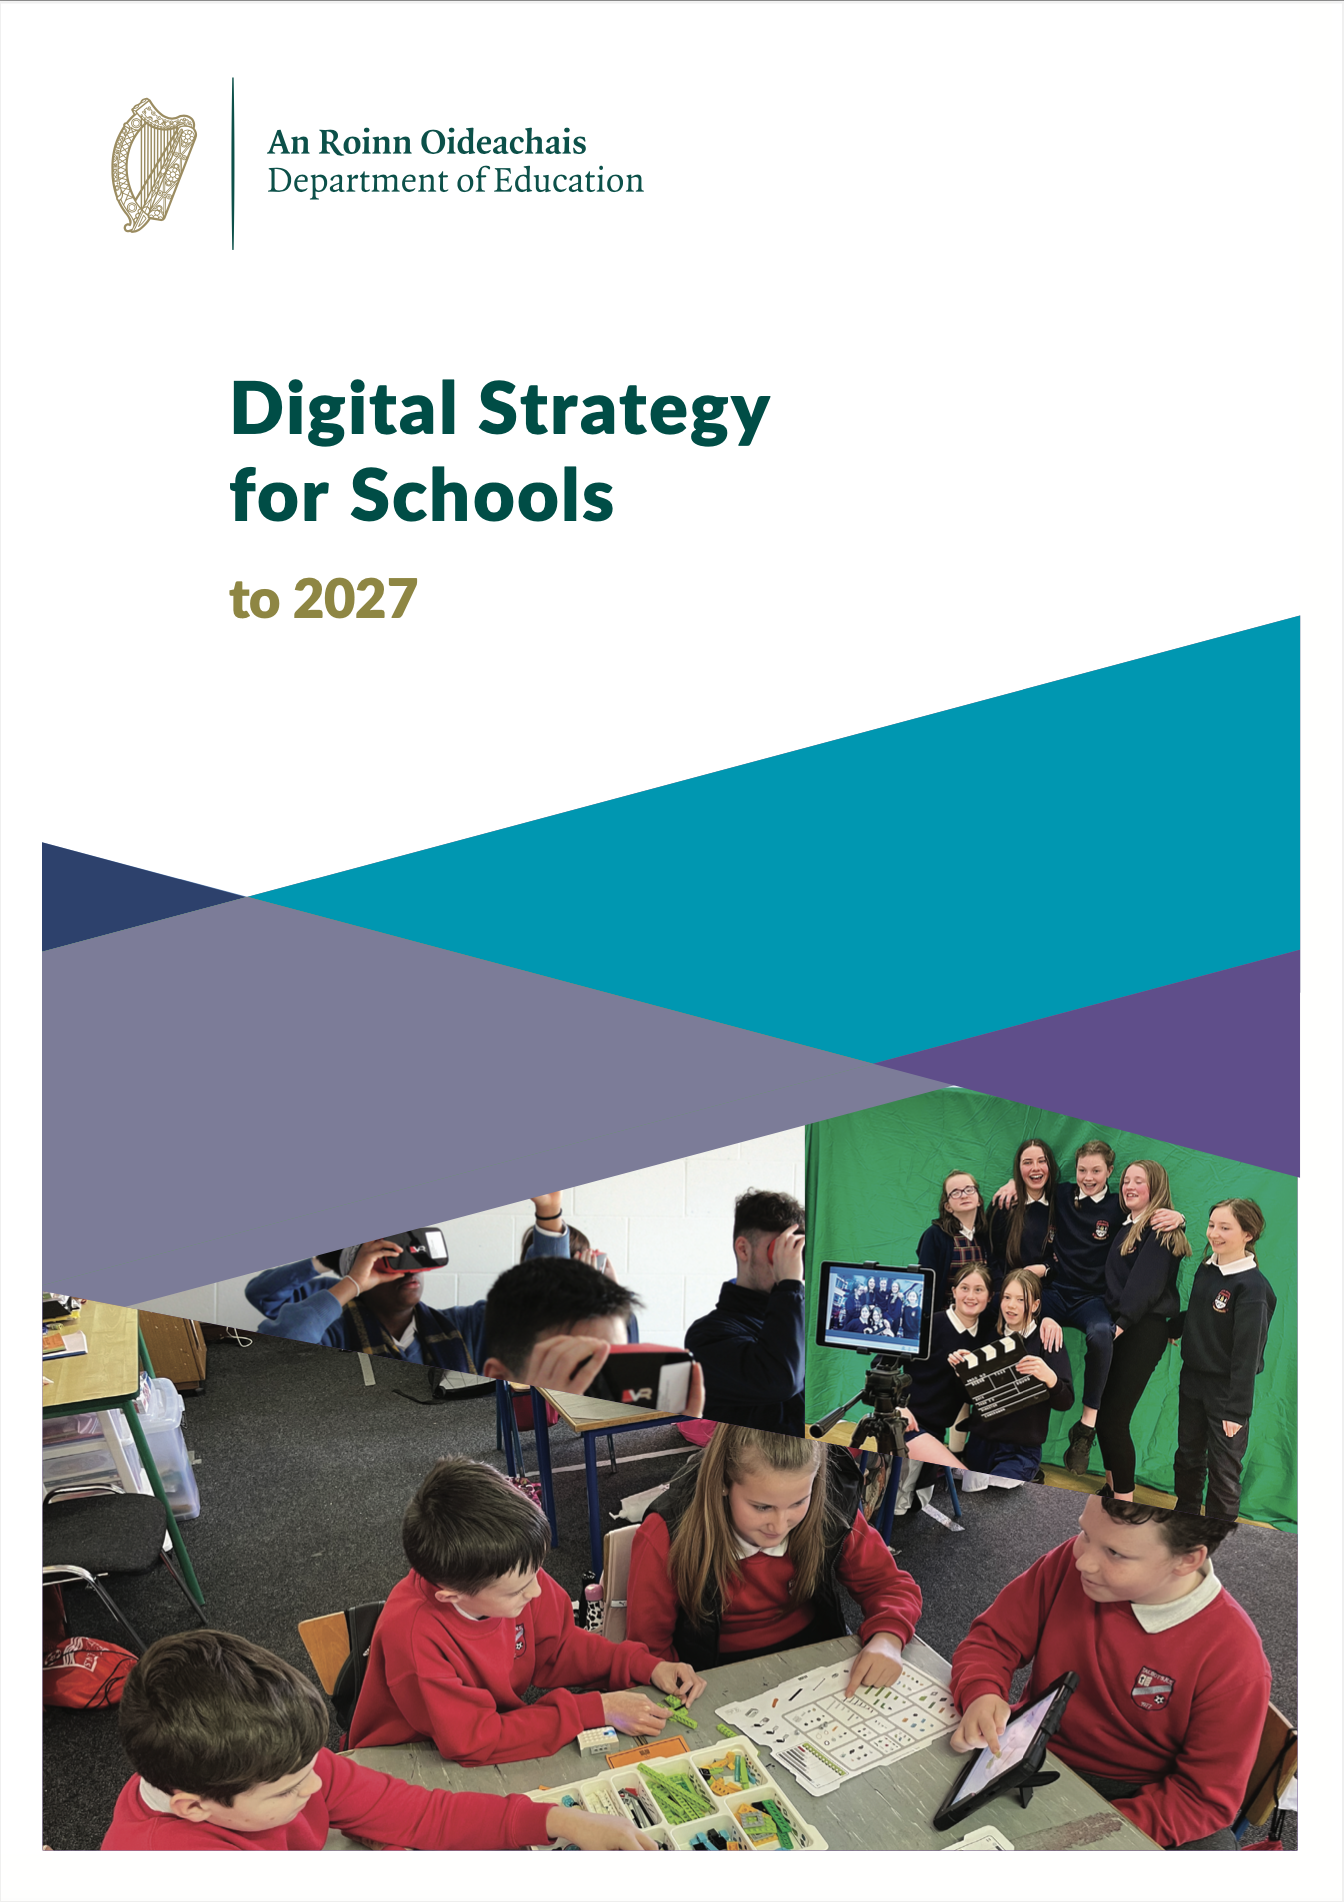 Digital Strategy for Schools to 2027